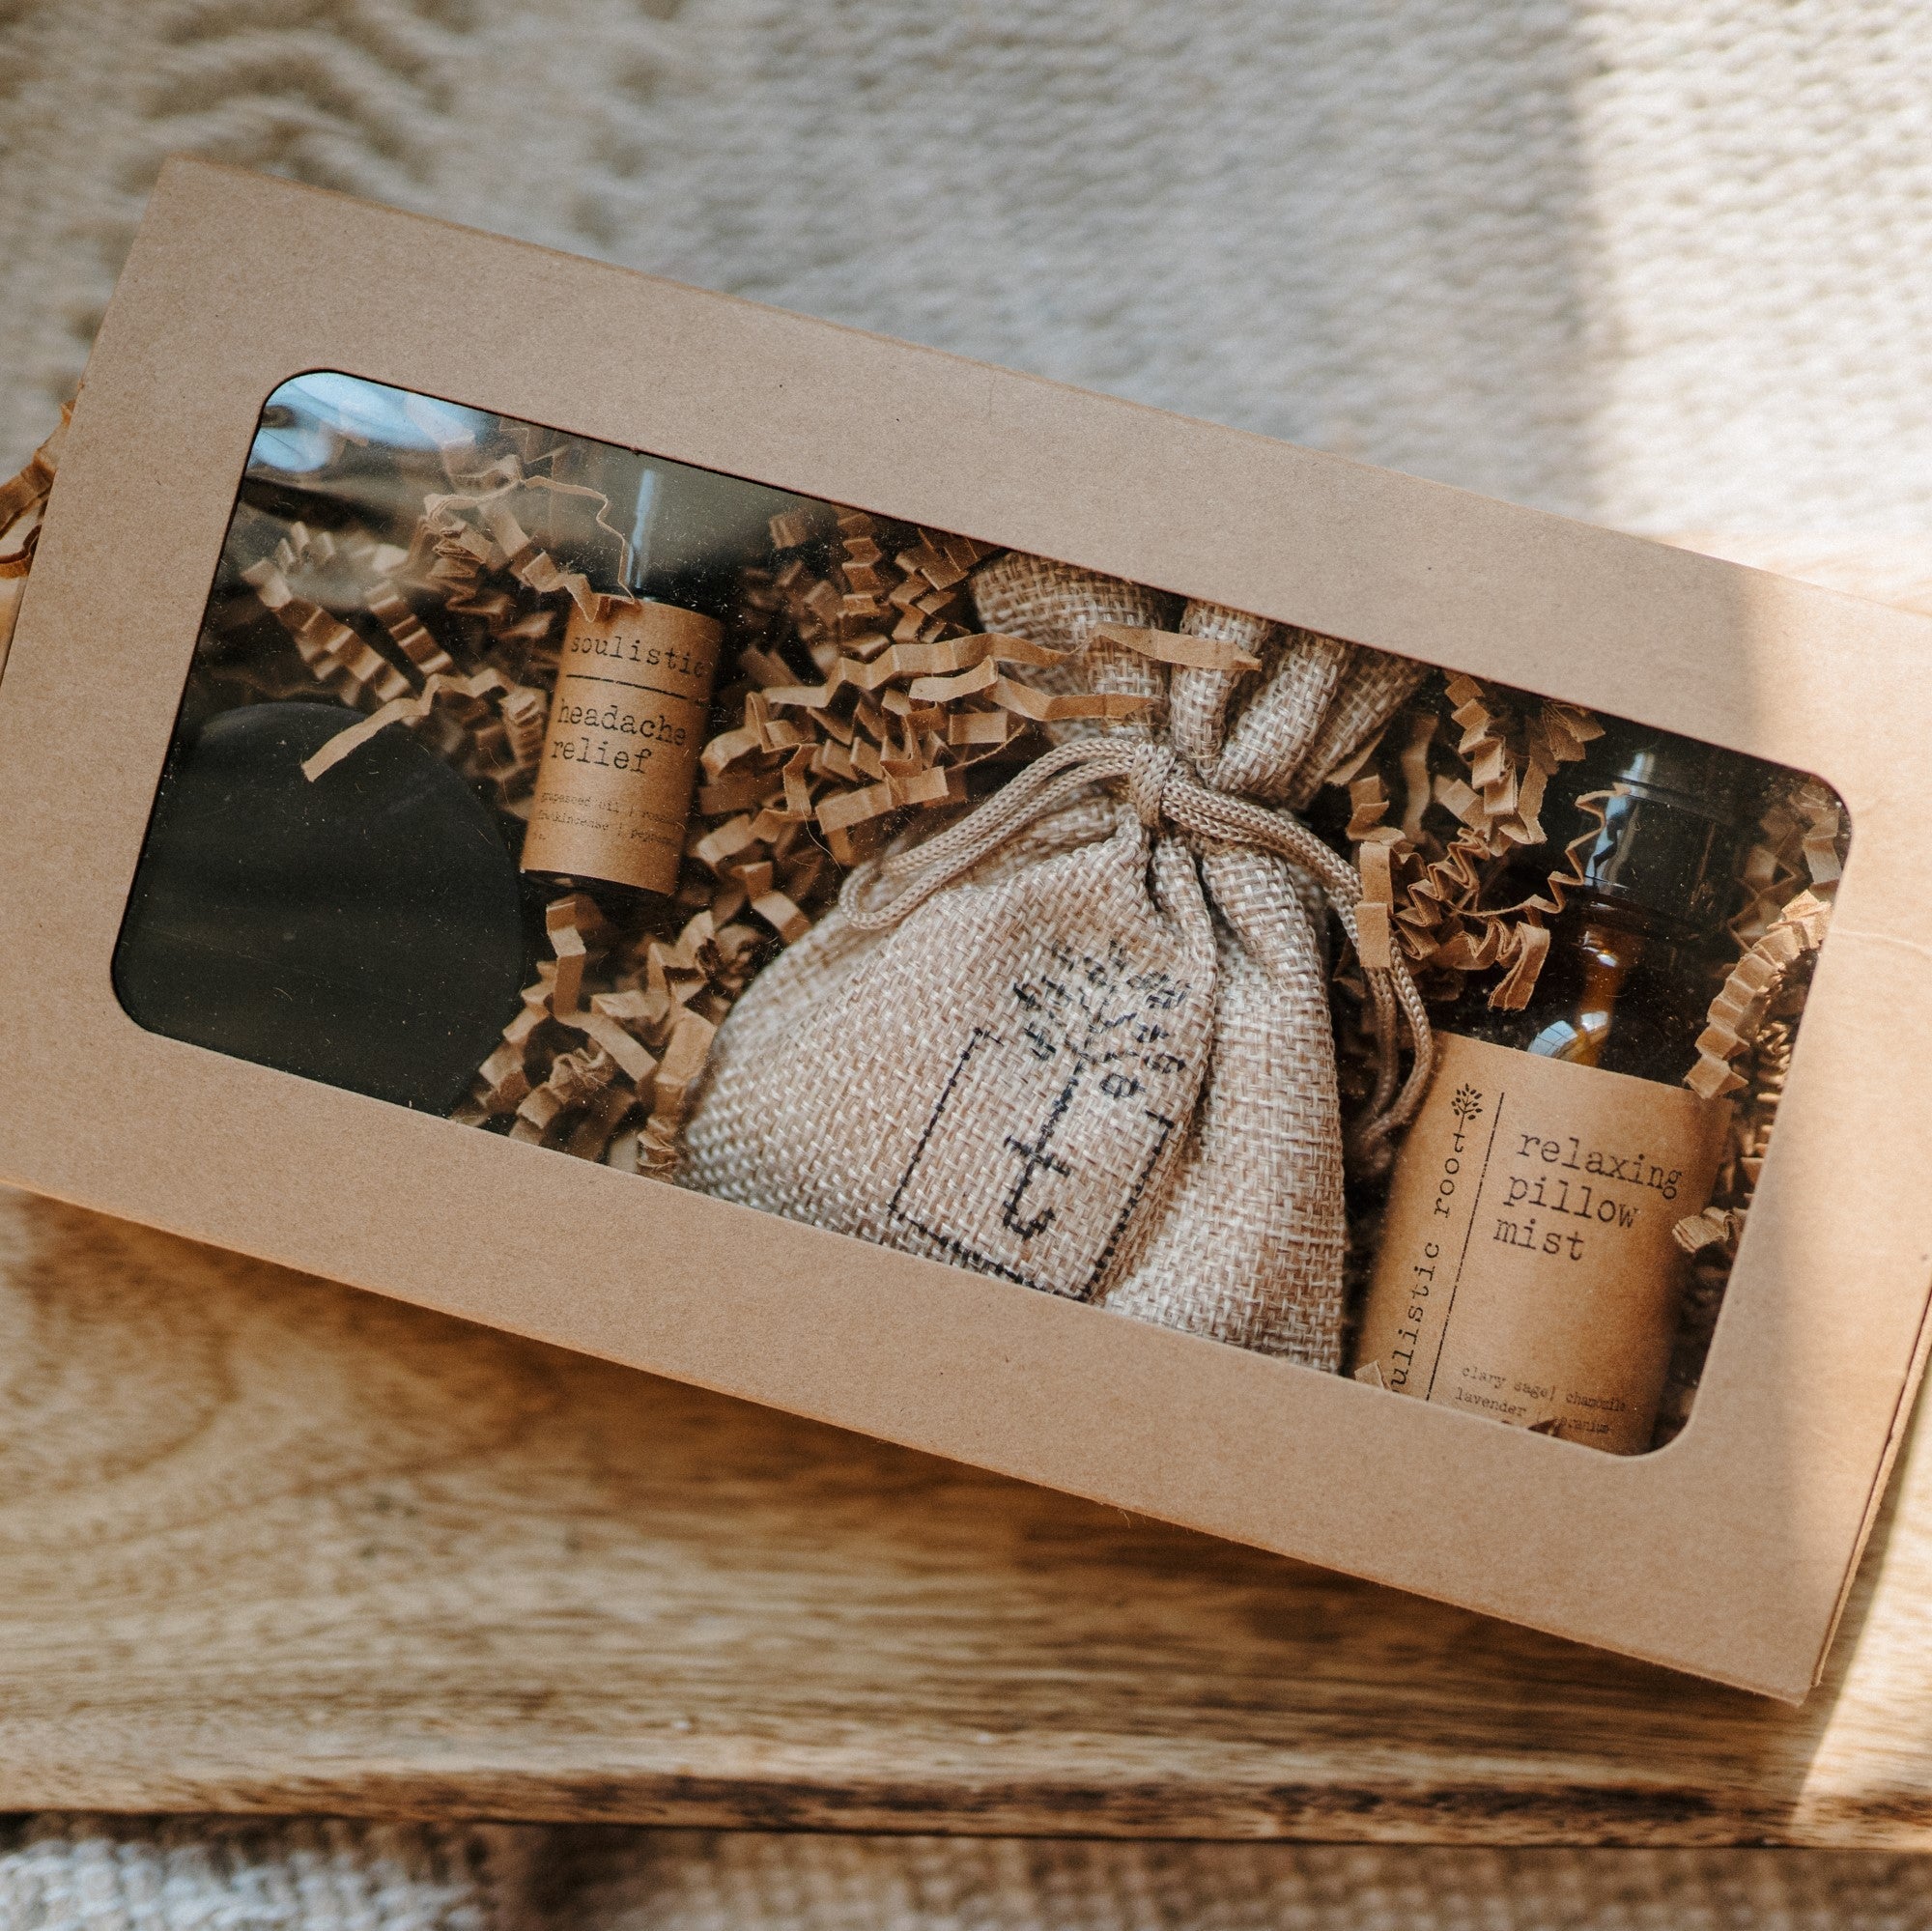 A travel set full of sample sizes already wrapped in a kraft box. The set includes a lavender & chamomile epsom salt bath, essential oil headache relief roller, organic herbal oatmeal bath soak & a relaxing pillow spray. The set is on a piece of wood on a white blanket.